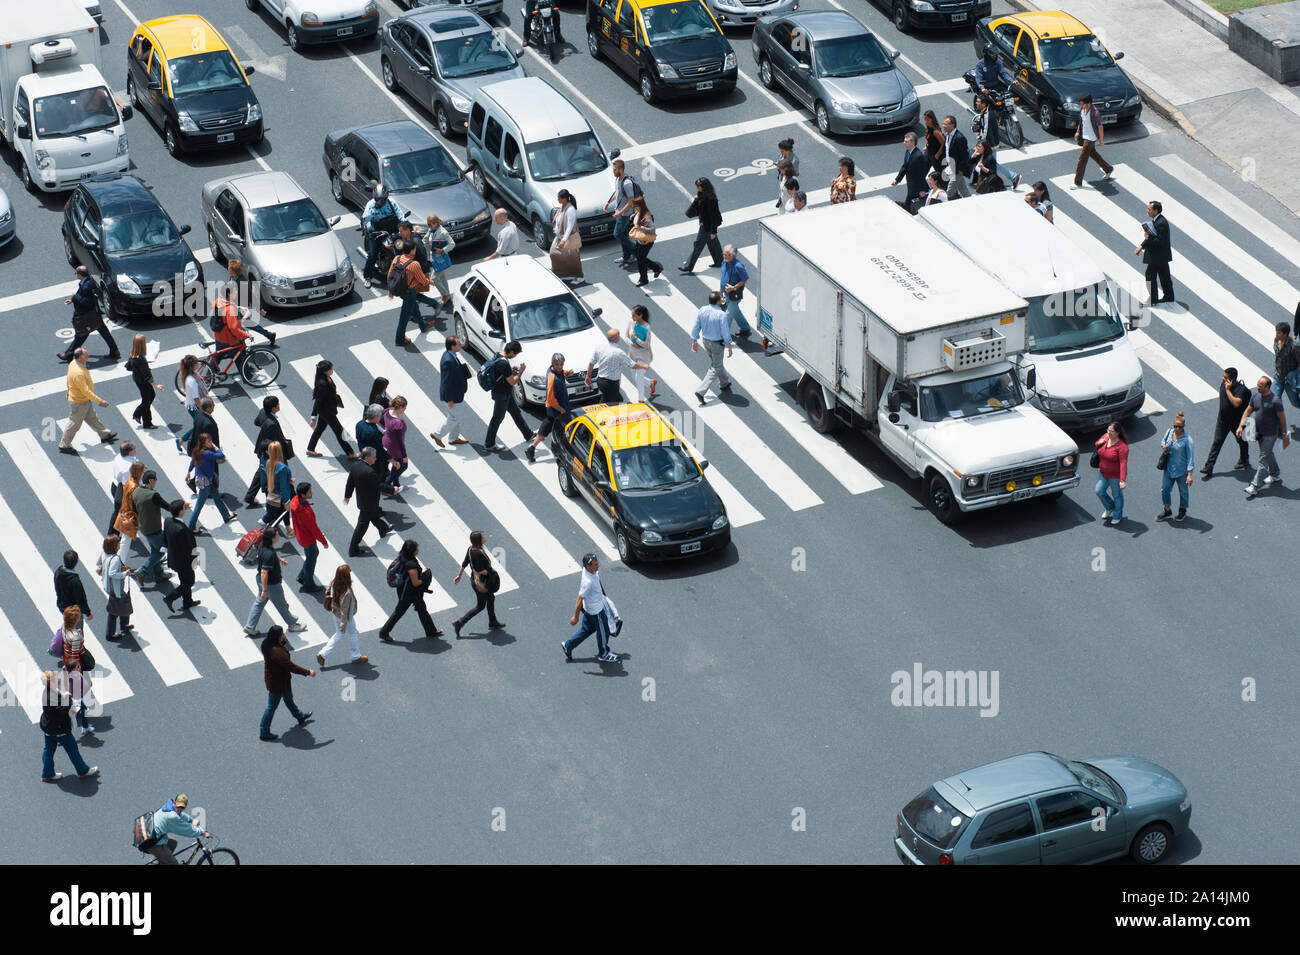 Buenos Aires, Argentina - November 12 2012: Pedestrians crossing the street over the zebra. Stock Photo